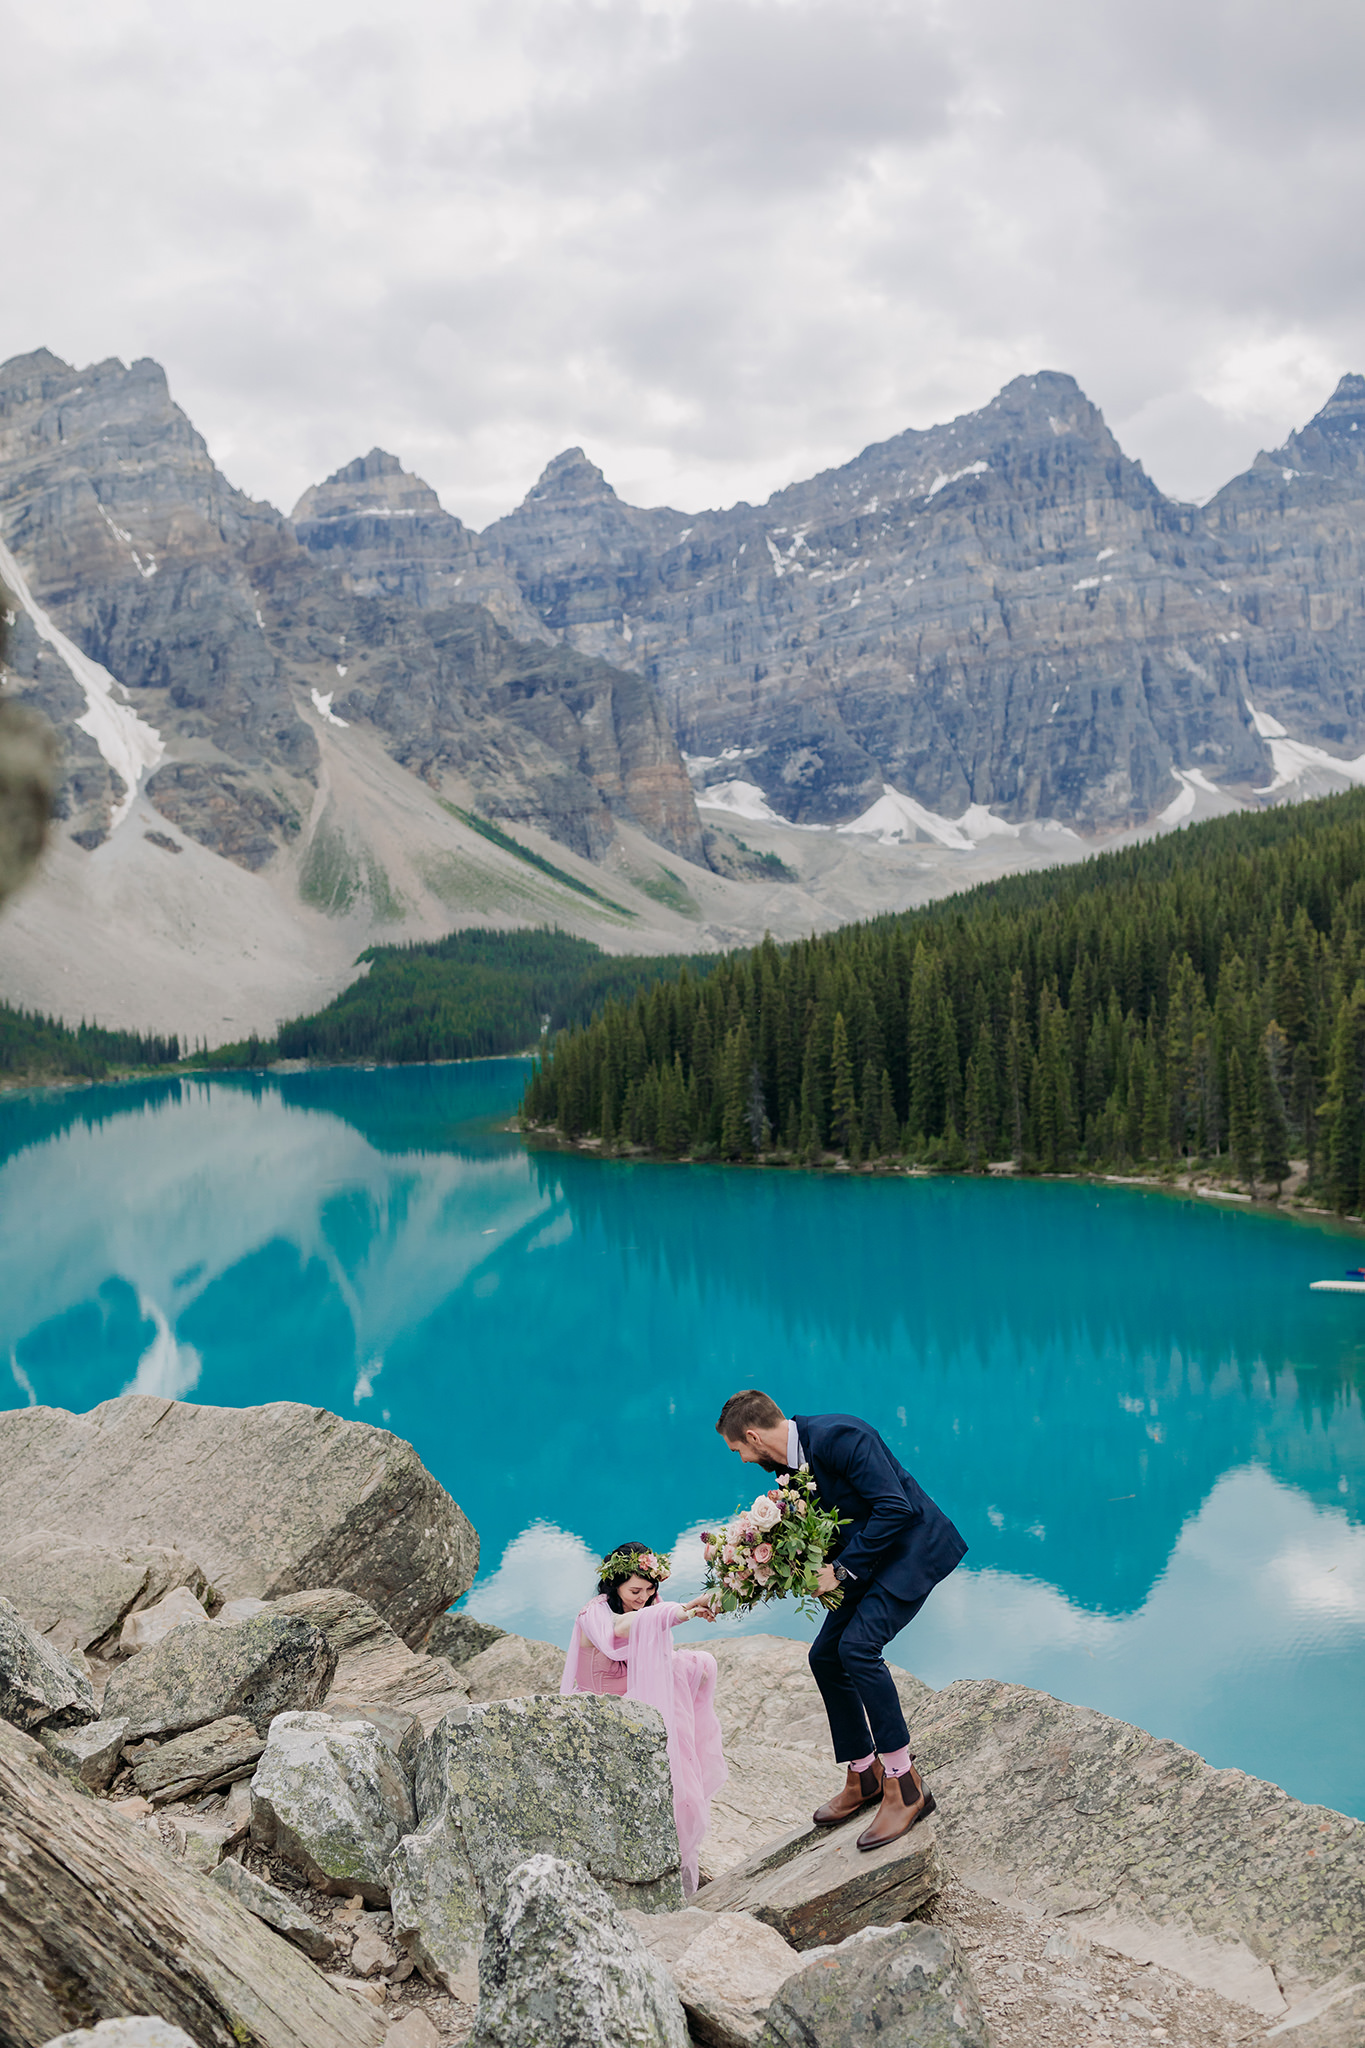 adventurous mountain wedding with bride in pink in the Cnadian Rocky mountains in Summer